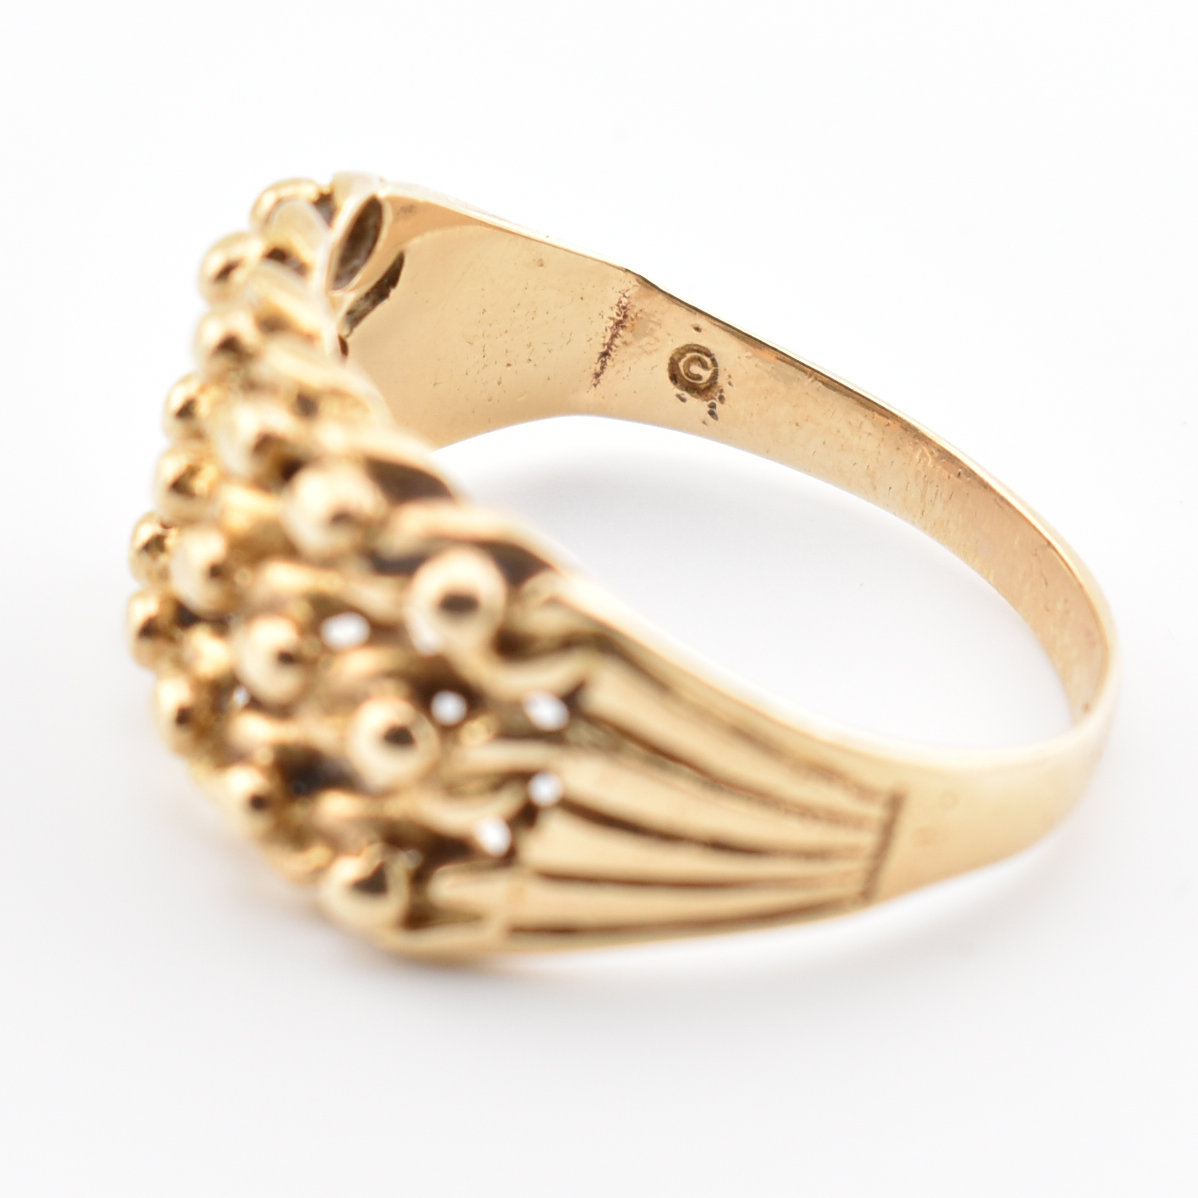 HALLMARKED 9CT GOLD KEEPERS RING - Image 3 of 8